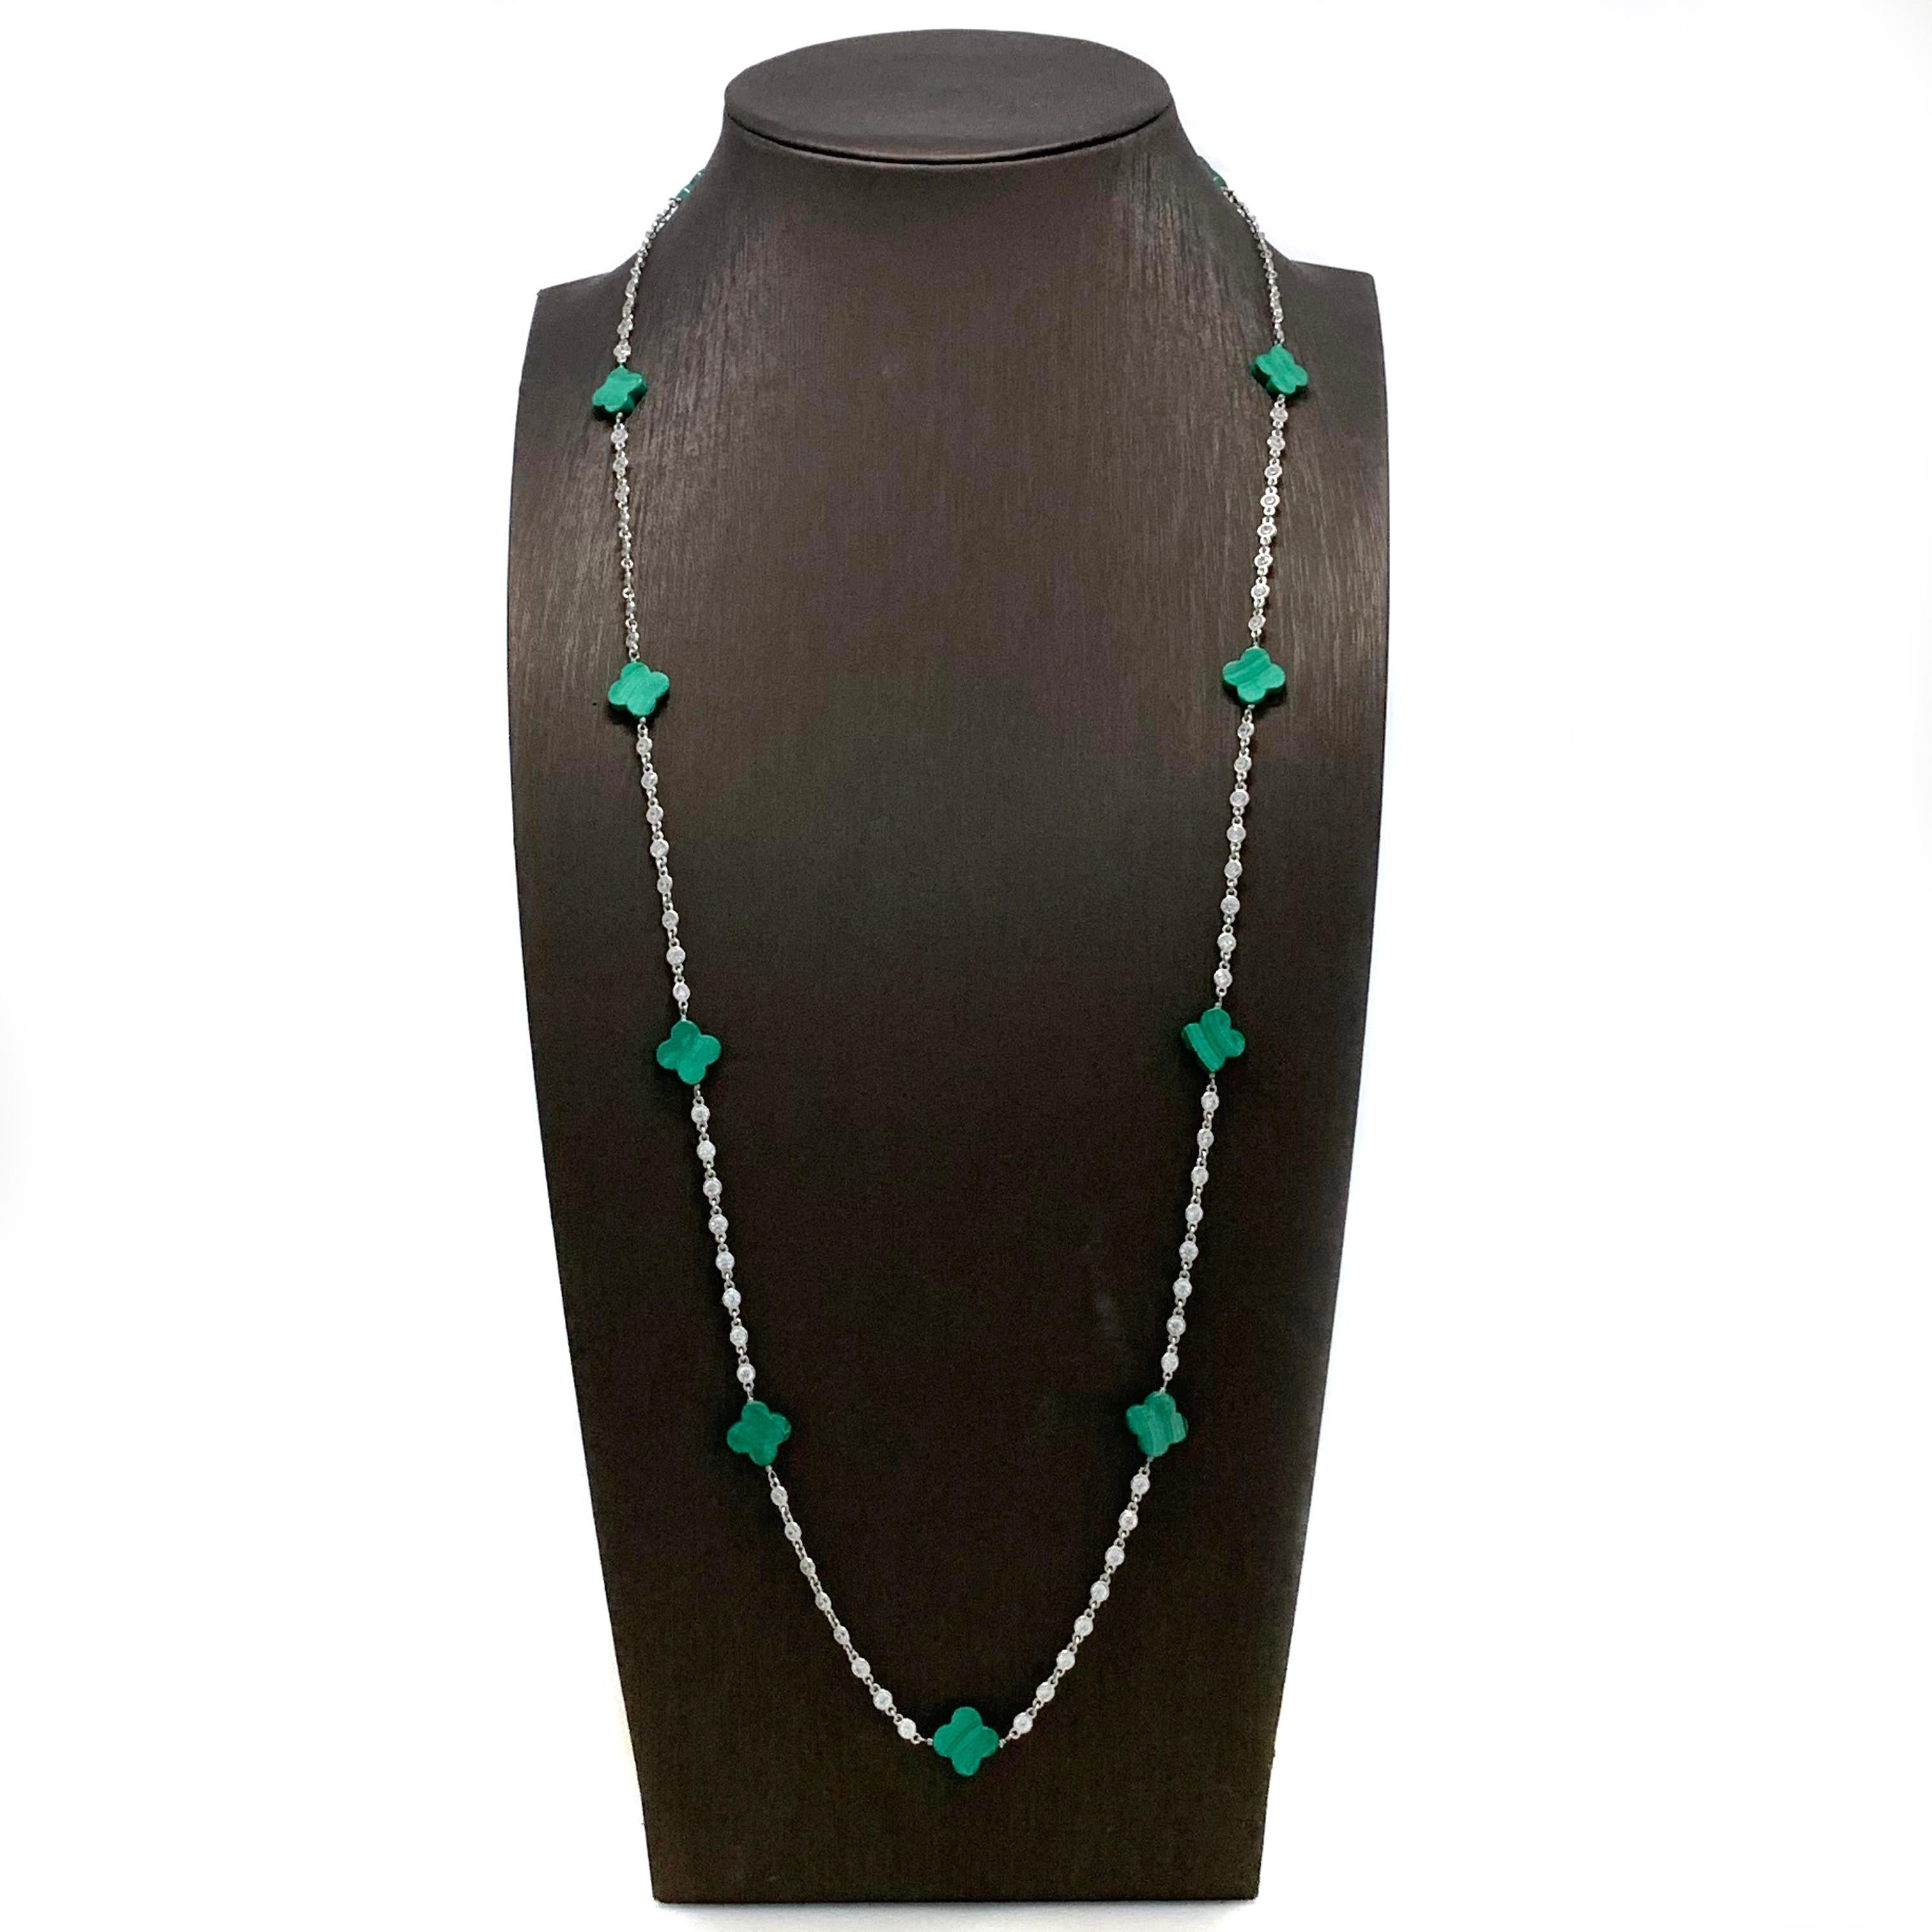 Malachite Clover Sterling Silver Long Station Necklace

The beautiful elegant necklace features 11 pieces of clover-shape malachite and continuous of hand bezel-set faceted faux diamond CZ (0.10ct size each - 9.60ct size total), all wire-wrapped and